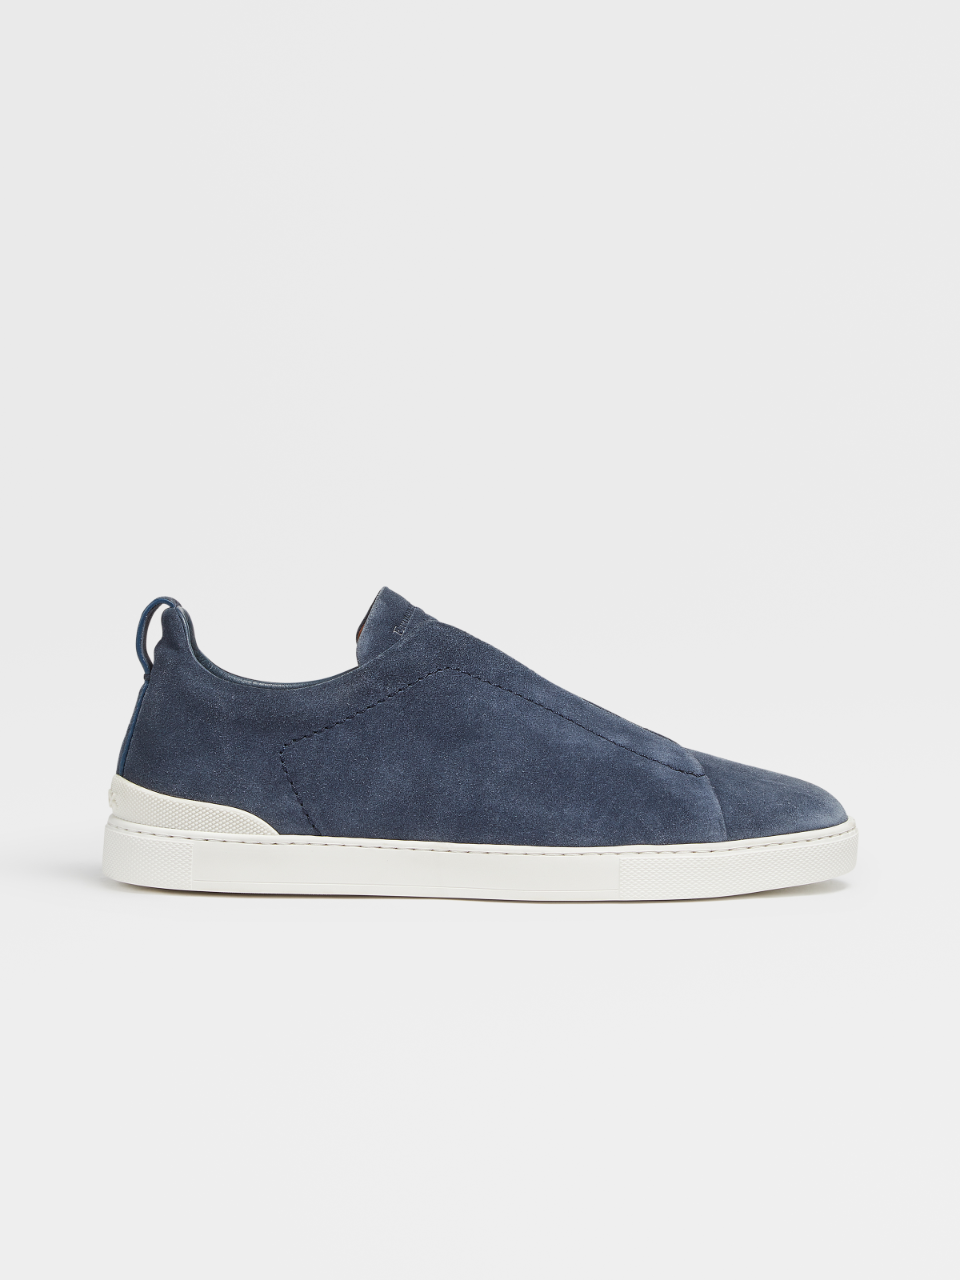 Bright Blue Suede Triple Stitch™ Sneakers